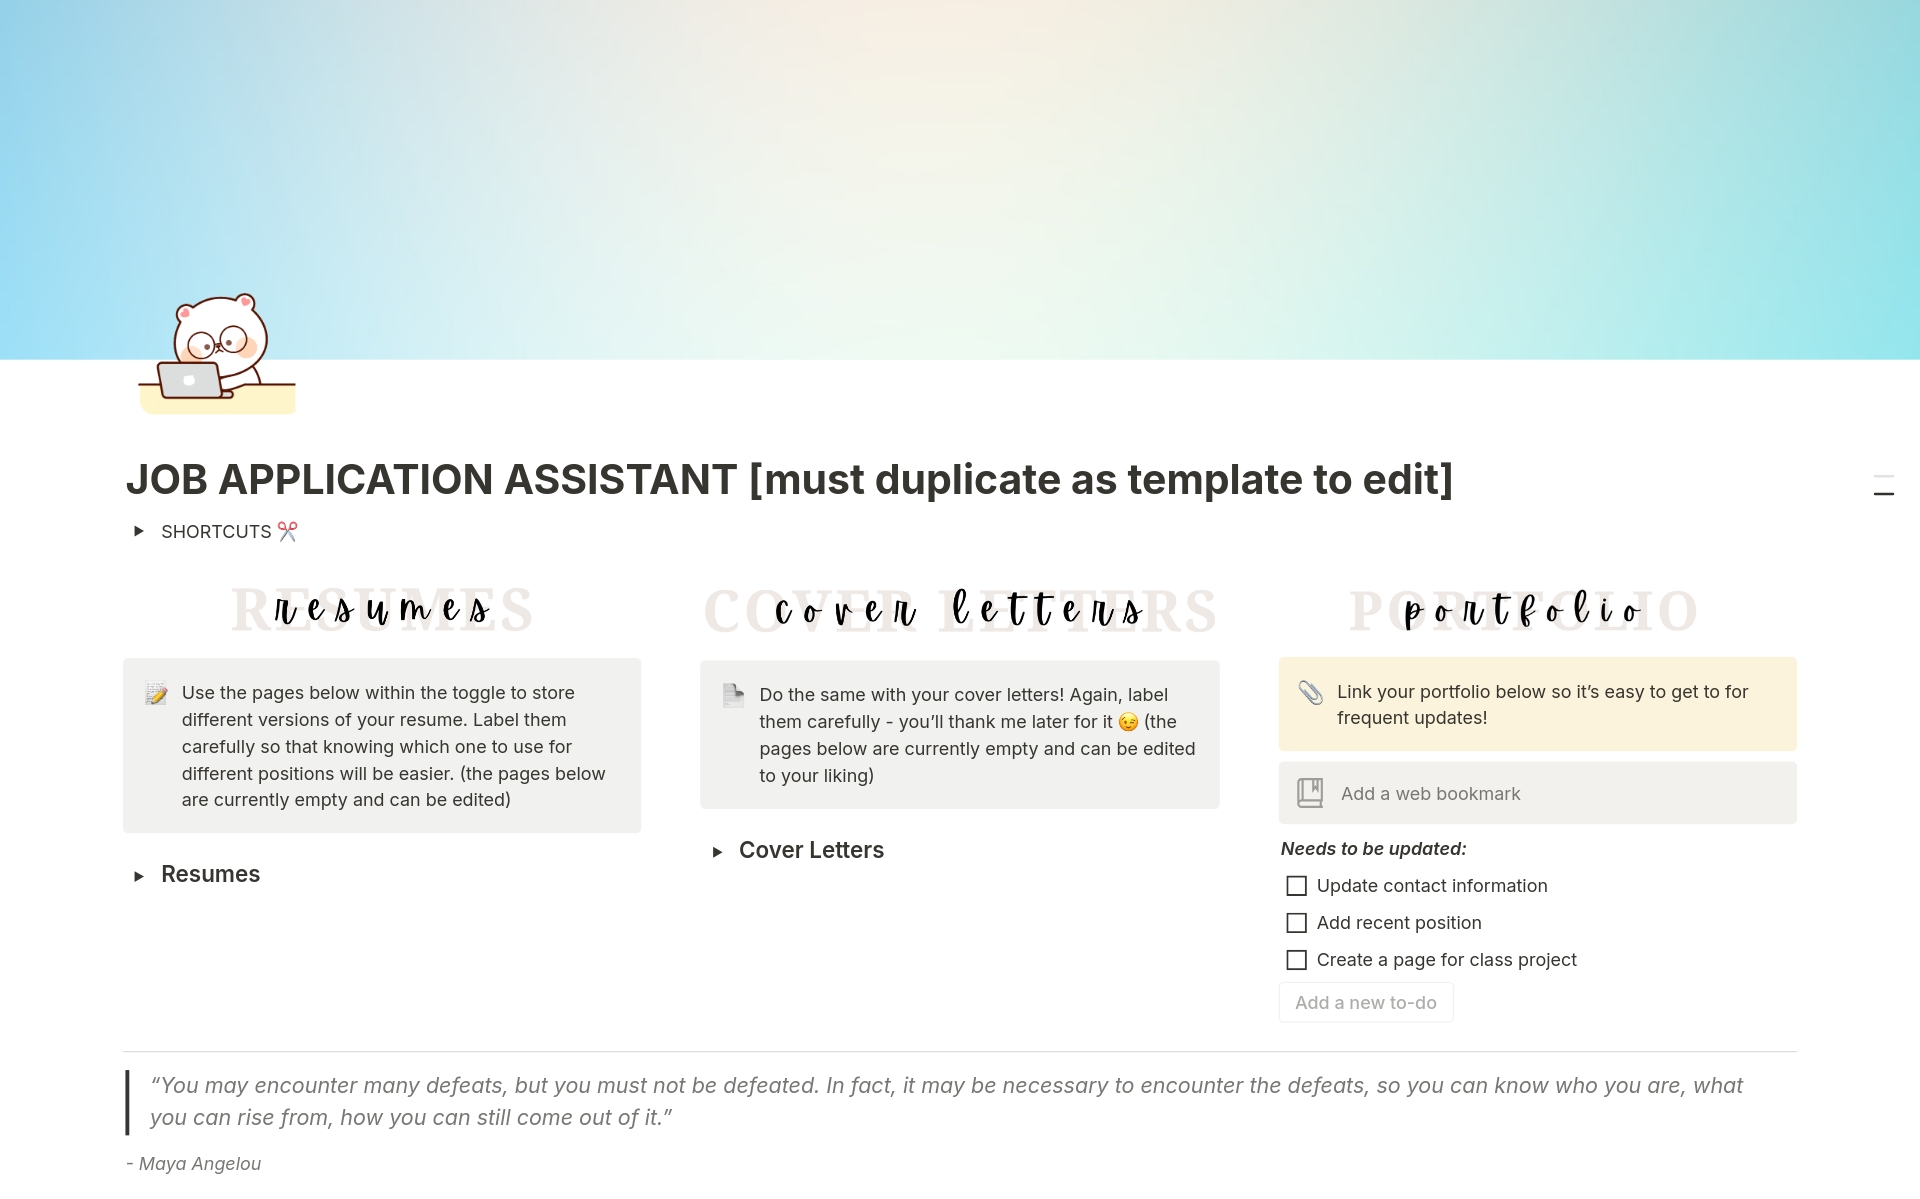 The JOB APPLICATION ASSISTANT is the ultimate product to help you reach your career and professional goals. I created it so that a ✨neurospicy✨ person (such as myself) can get through writing countless job-specific cover letters and resumes, therefore boosting my chances of ....